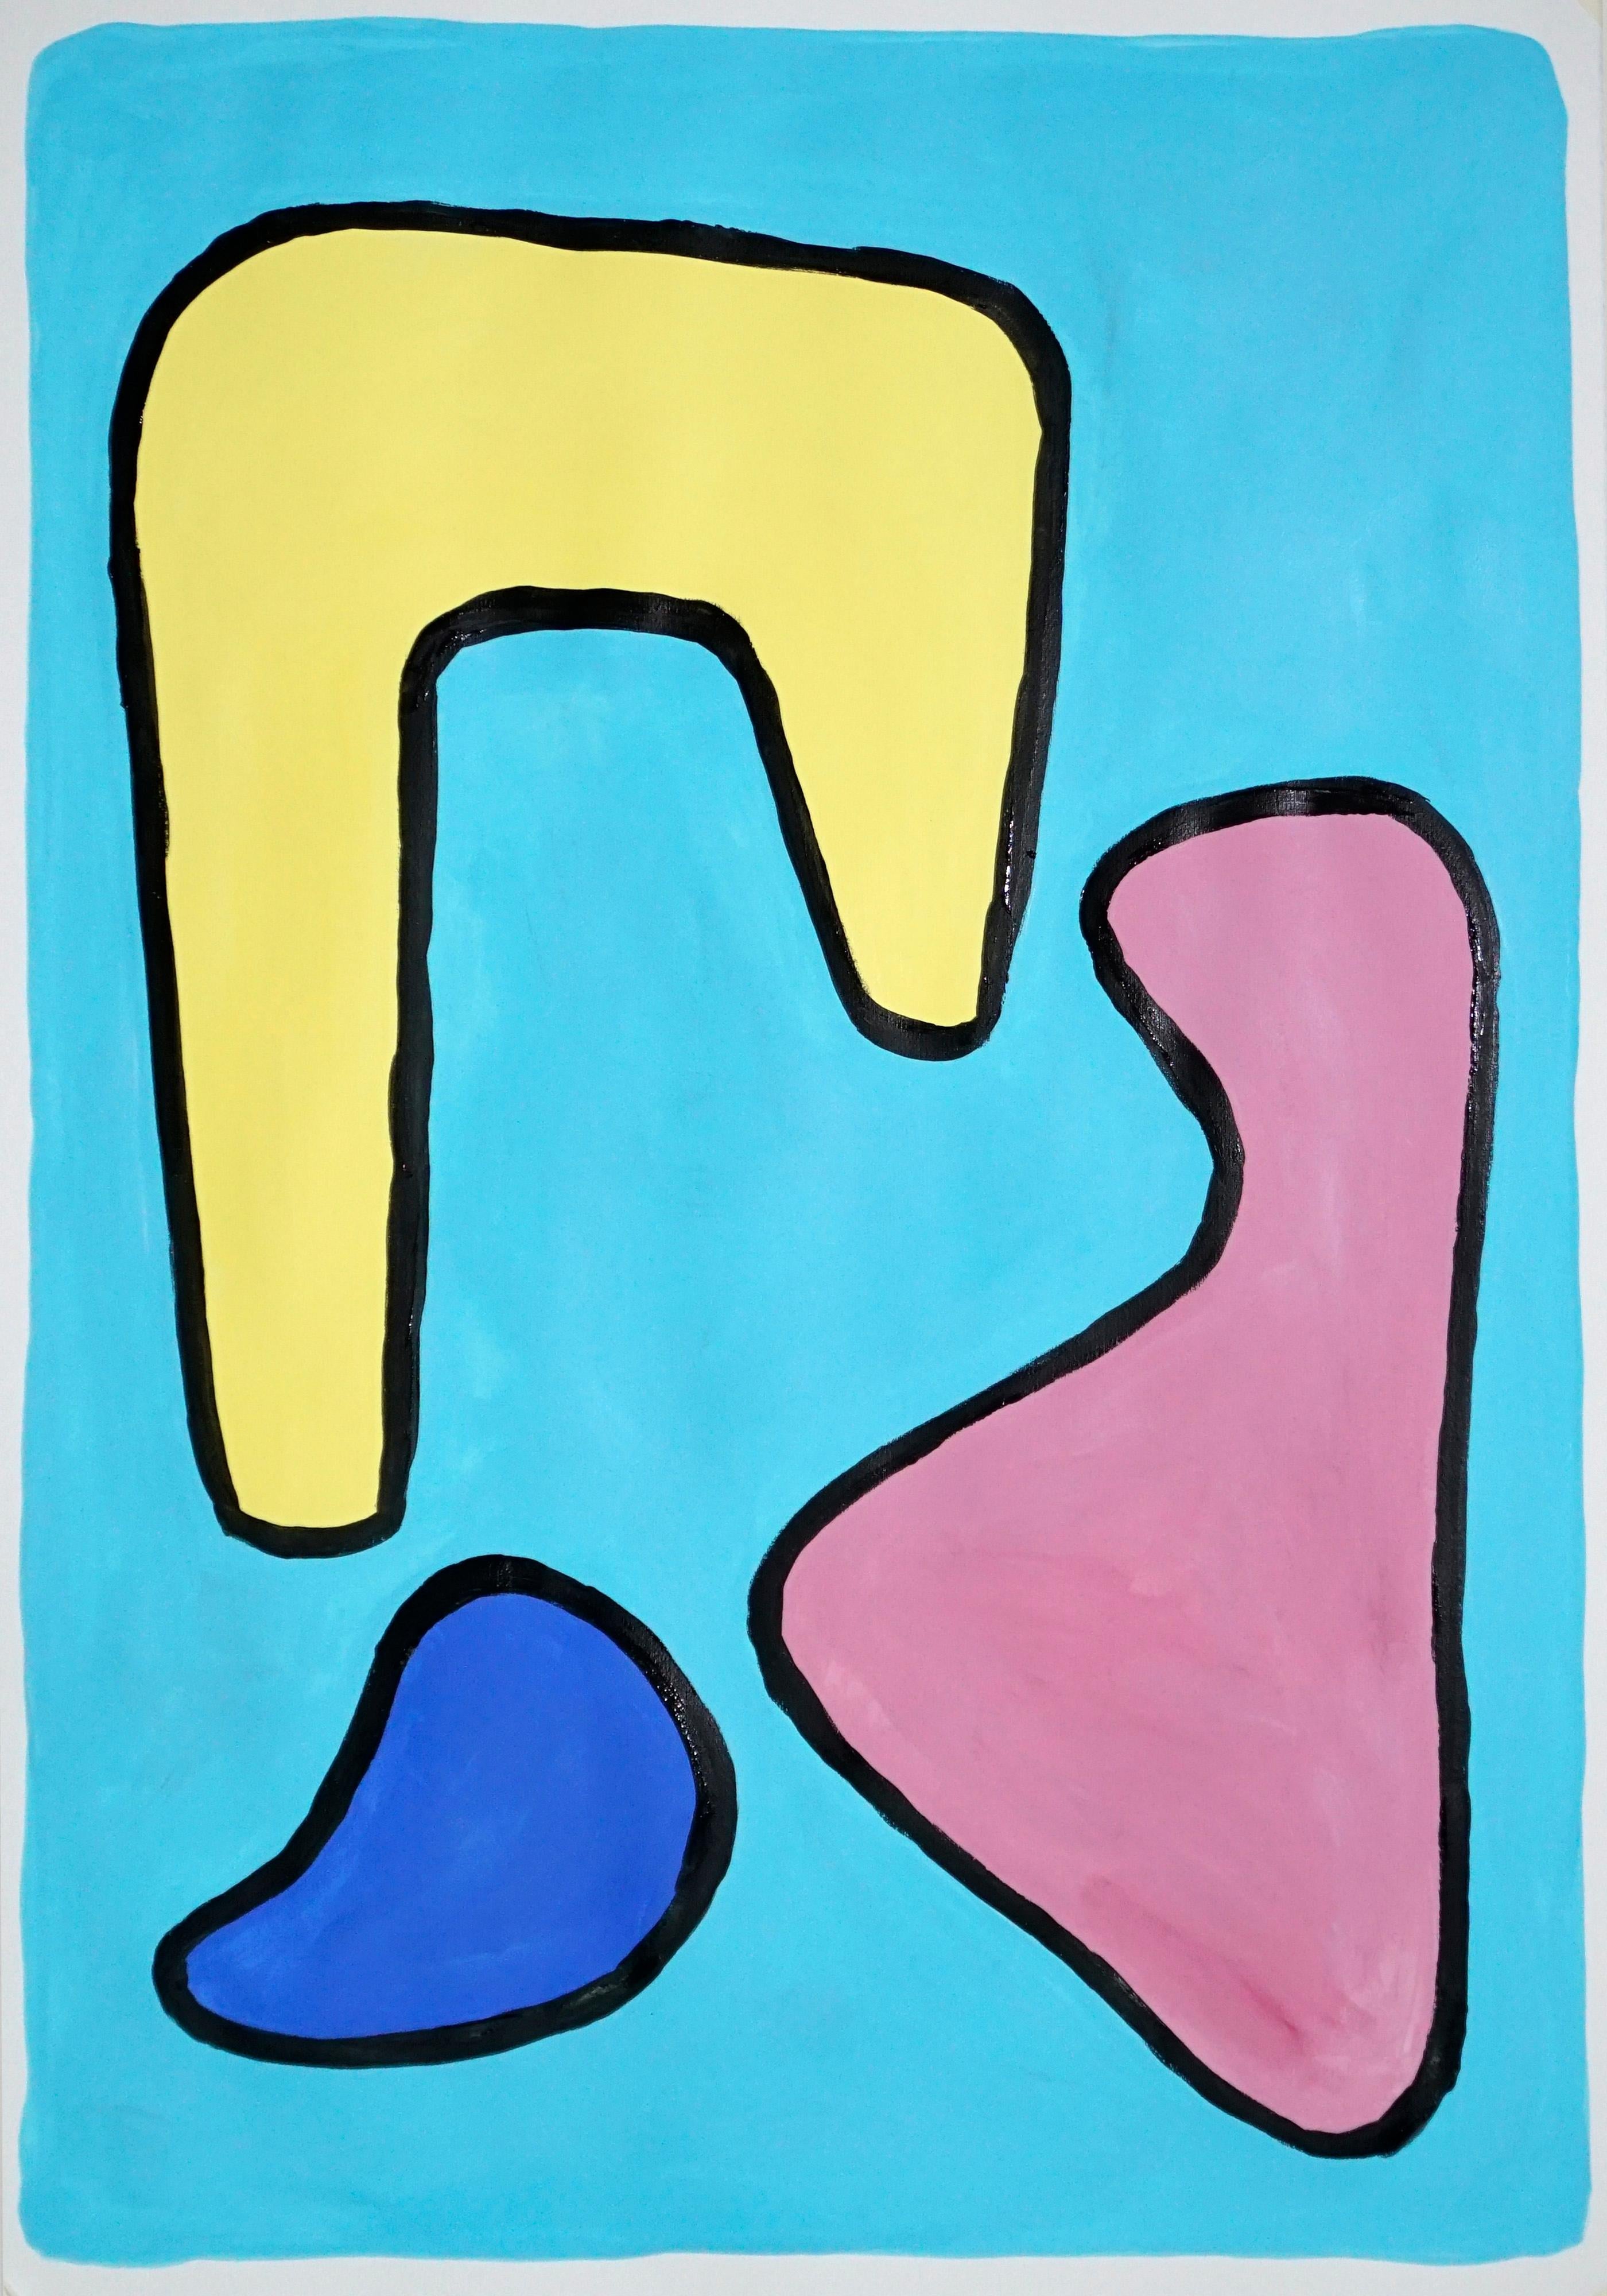 Modern Shapes in Primary Colors, Abstract Vivid Painting on Paper, Naïf Style